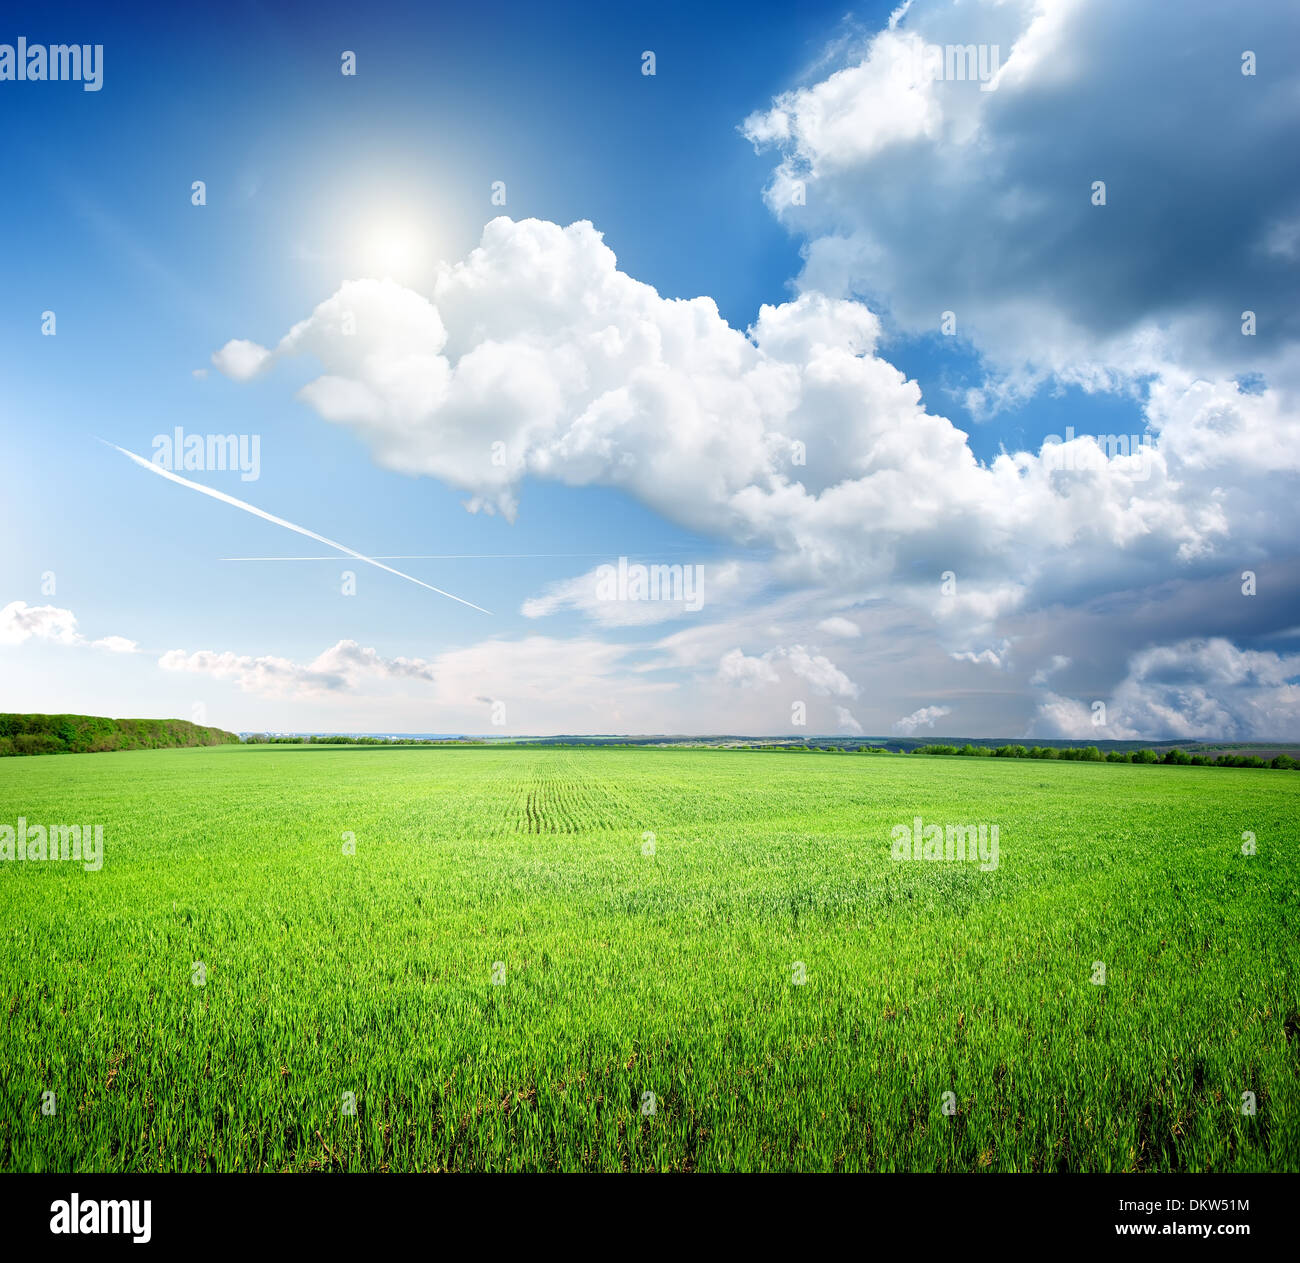 Field of grass and perfect blue sky Stock Photo